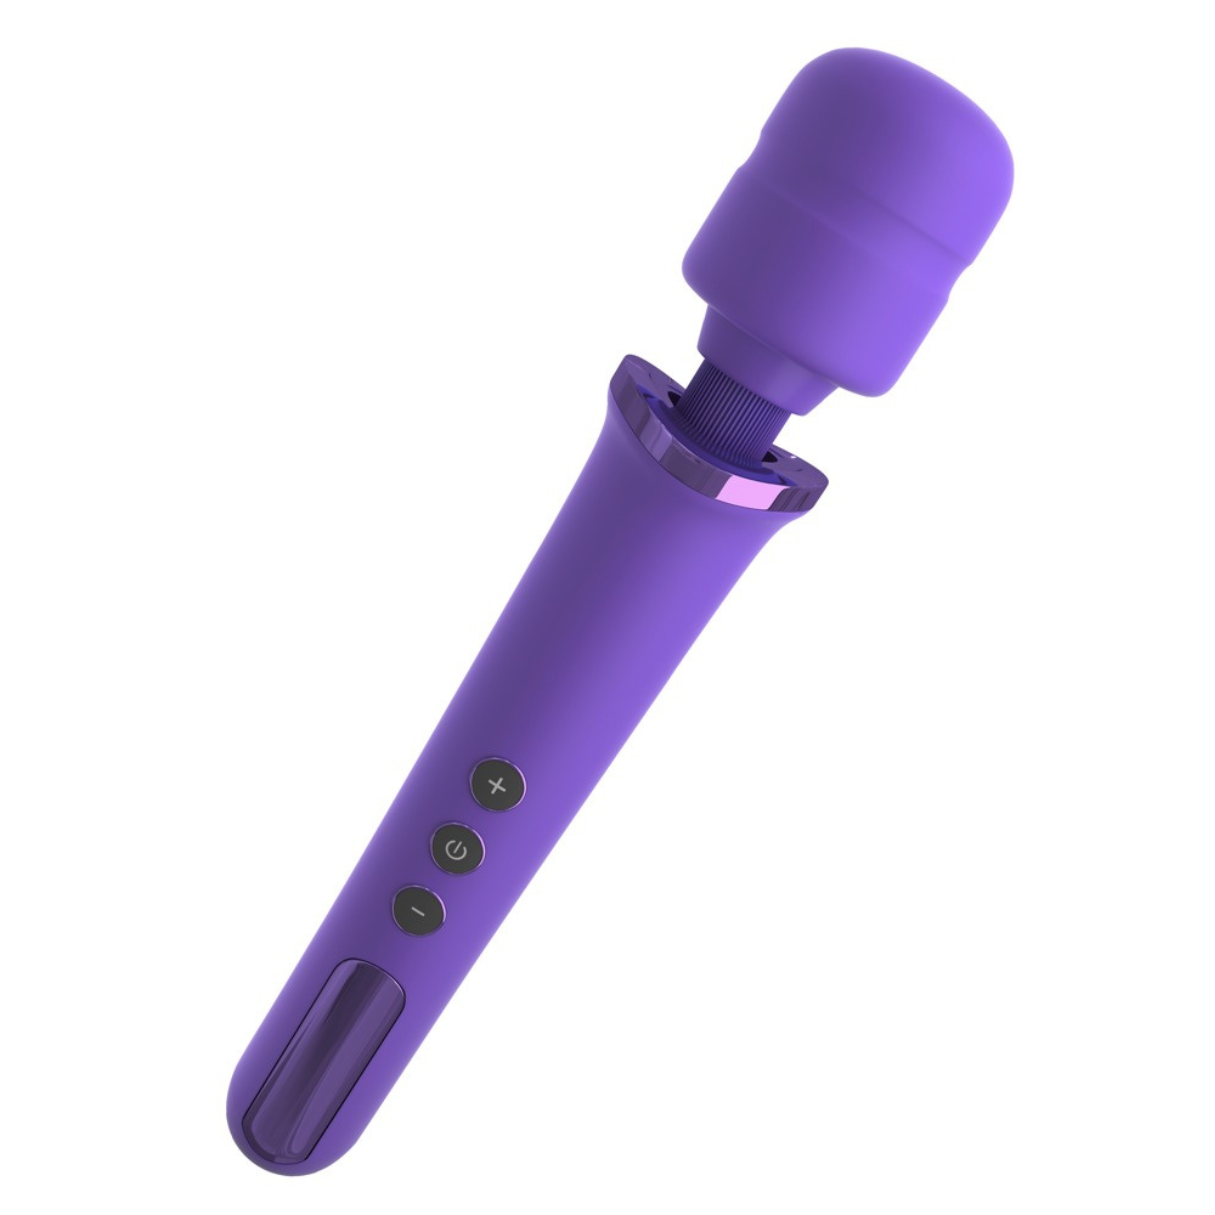 Rechargeable FOR FANTASY Wand Power Vibrator HER